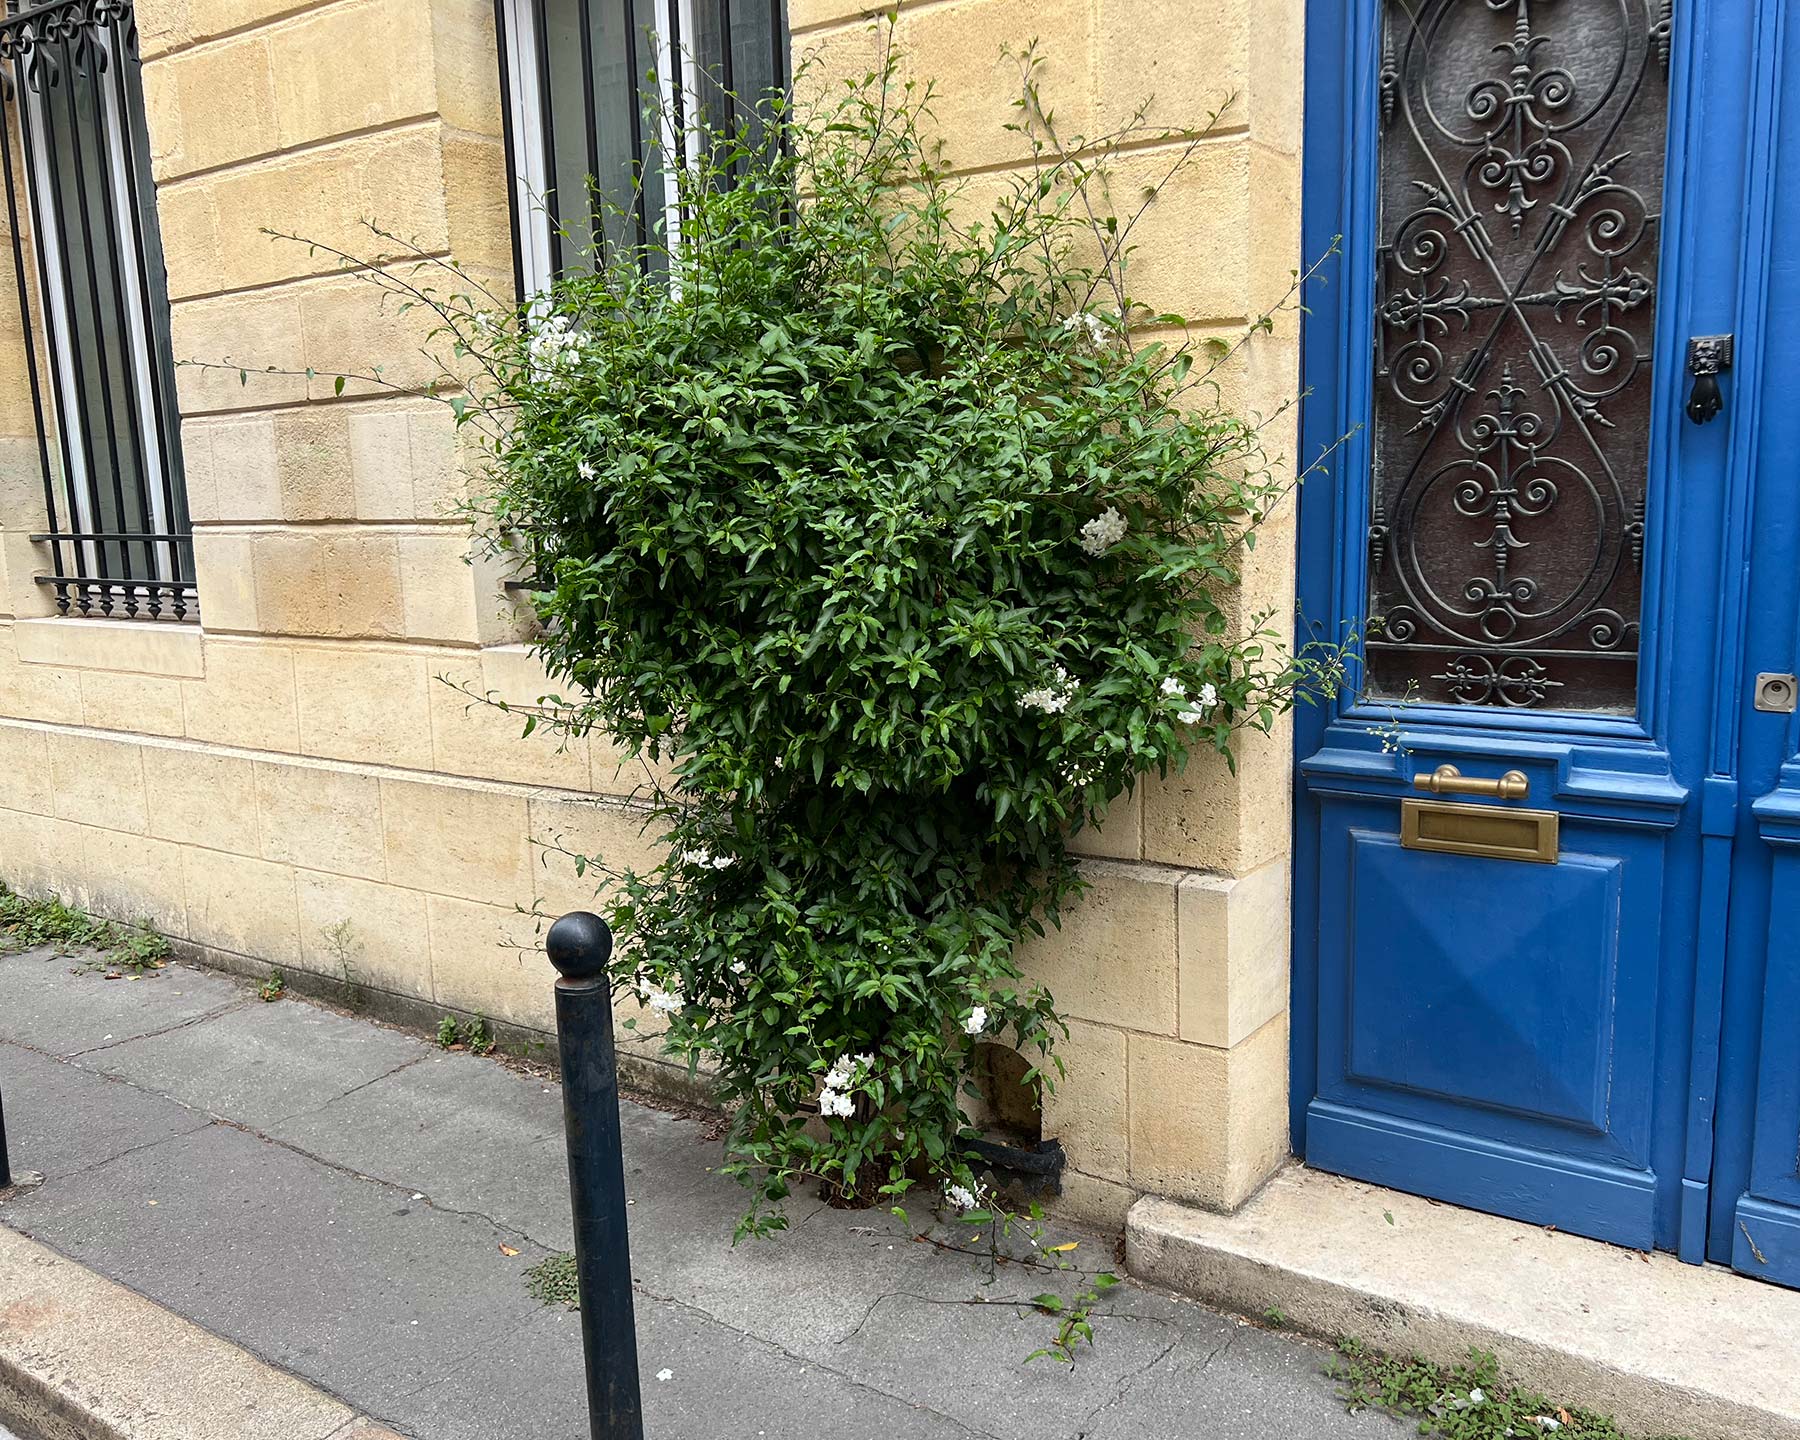 Solanum jasminoides - as seen in the back streets of Bordeaux, France.